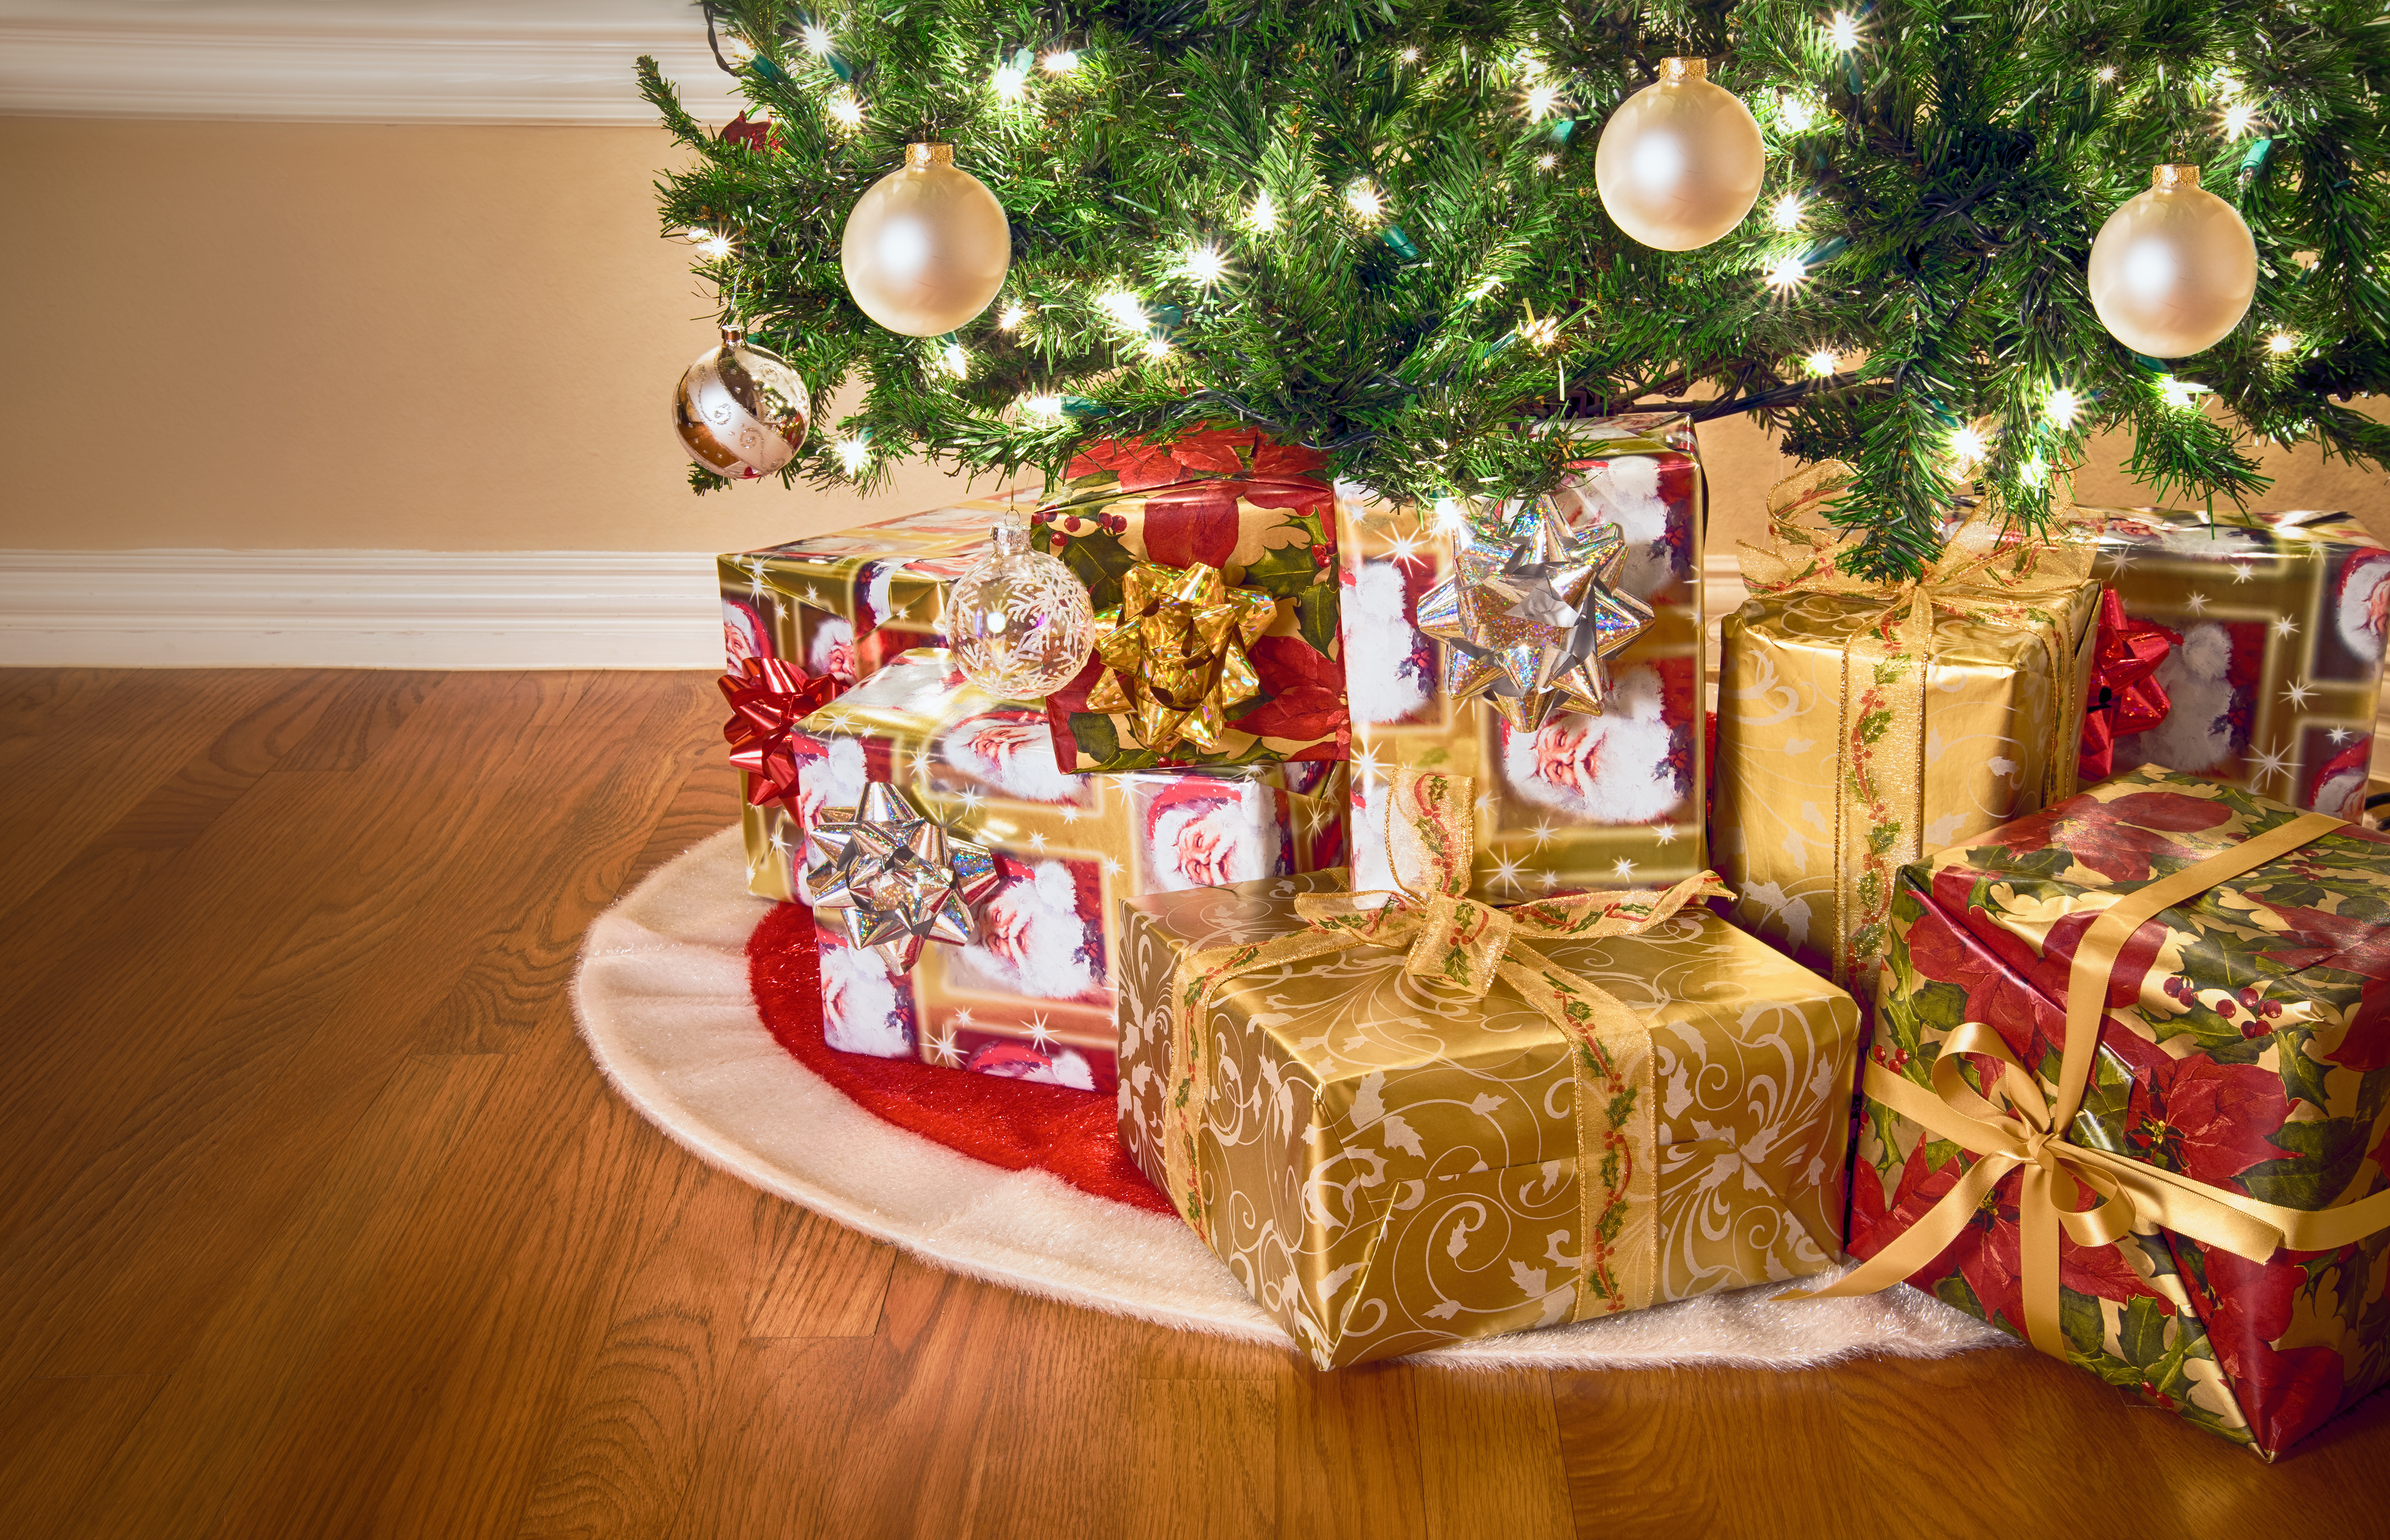 How to protect your hardwood floor this Christmas